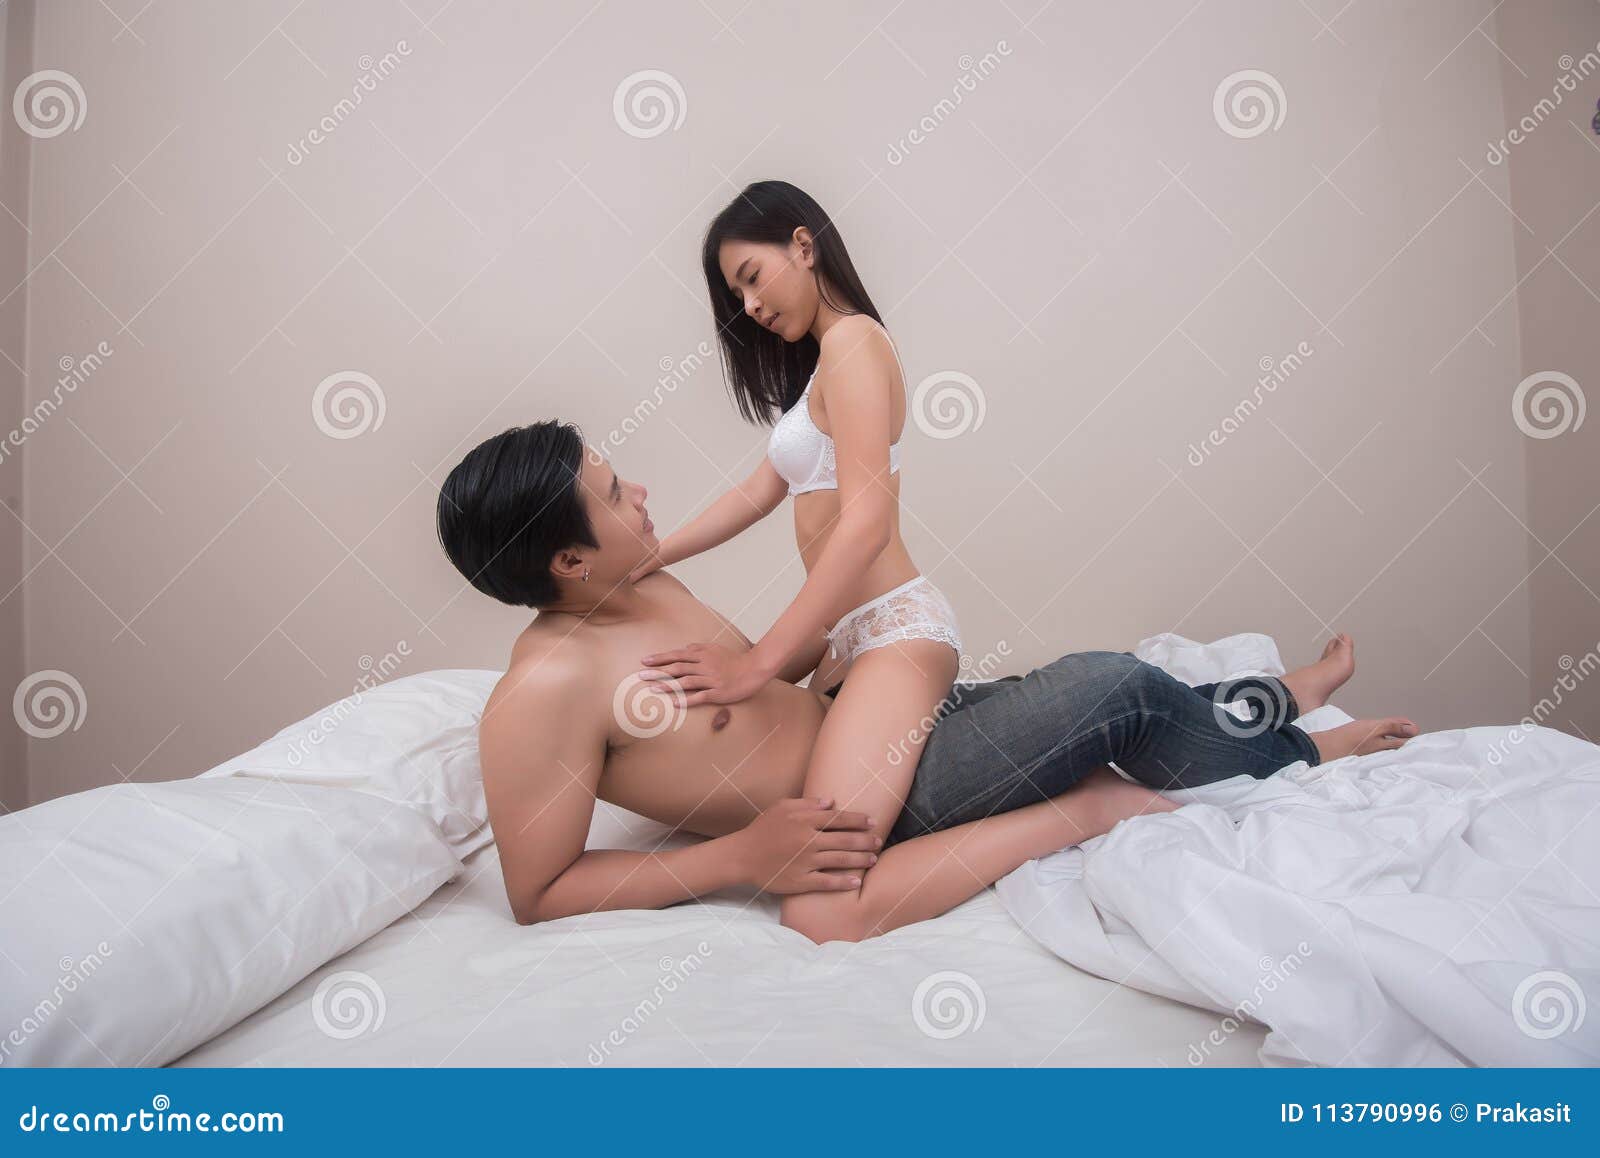 Sex in young couple